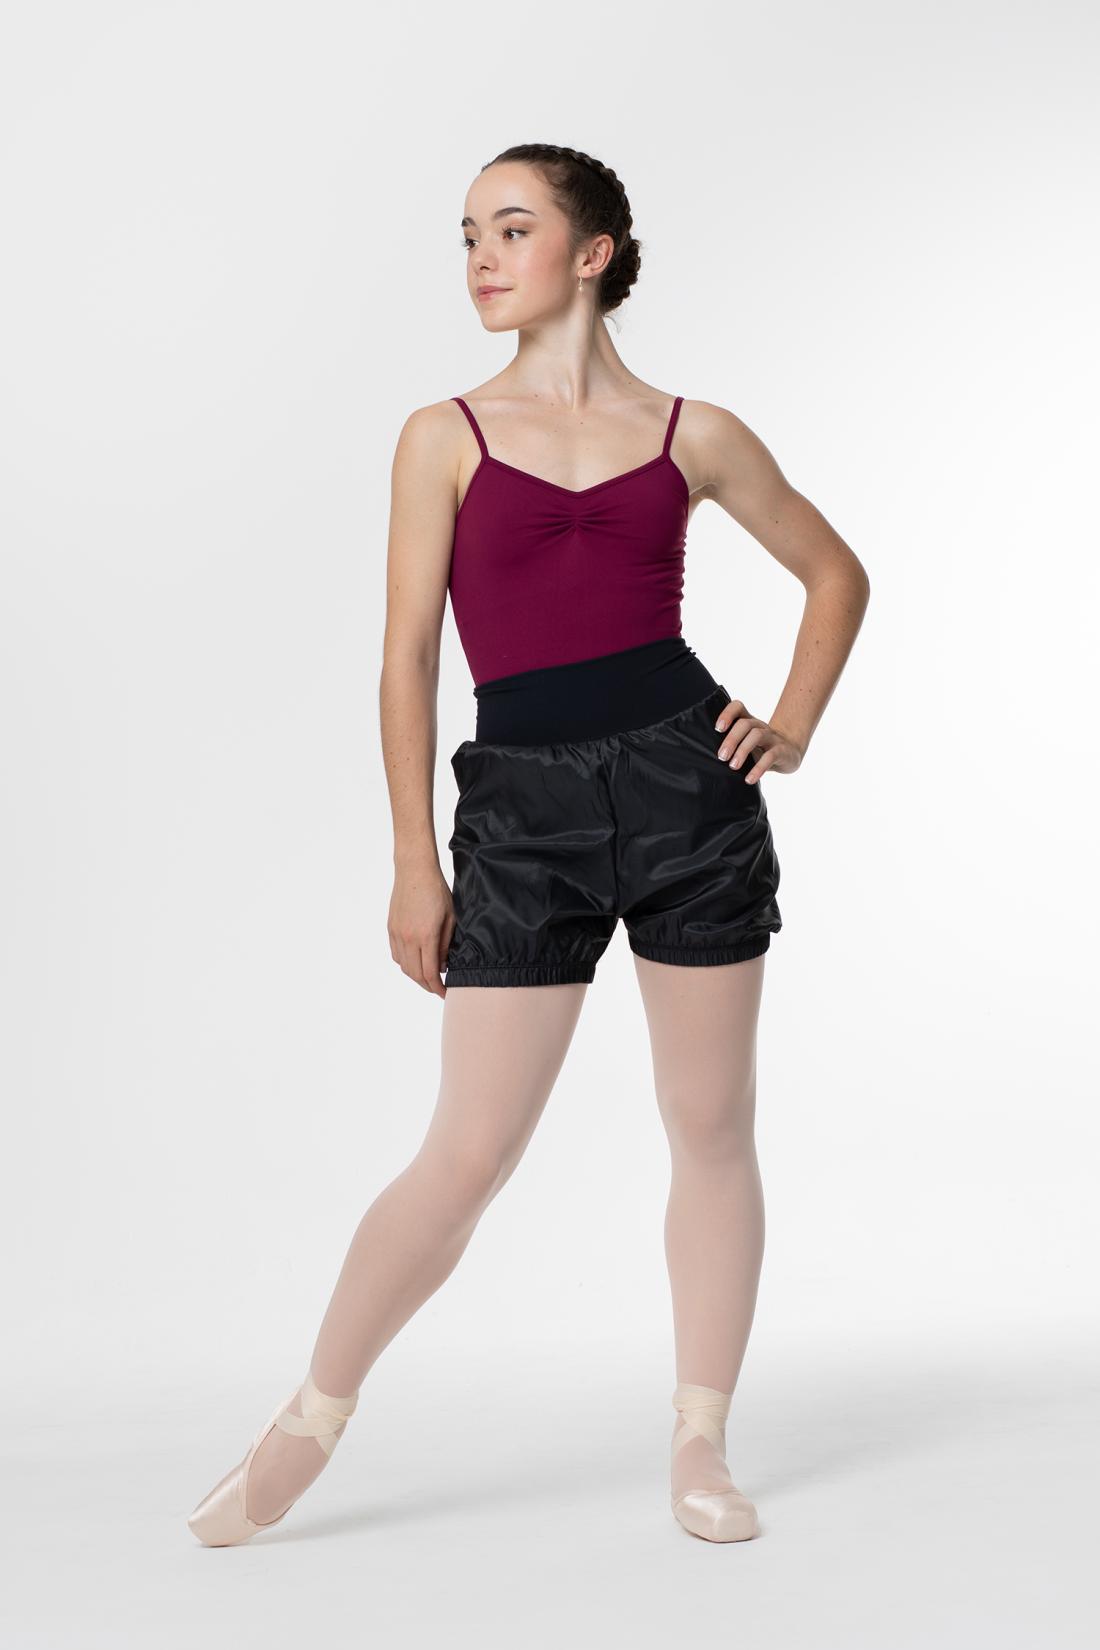 Perspiration Warm up Sweat Shorts with pockets ballet dance